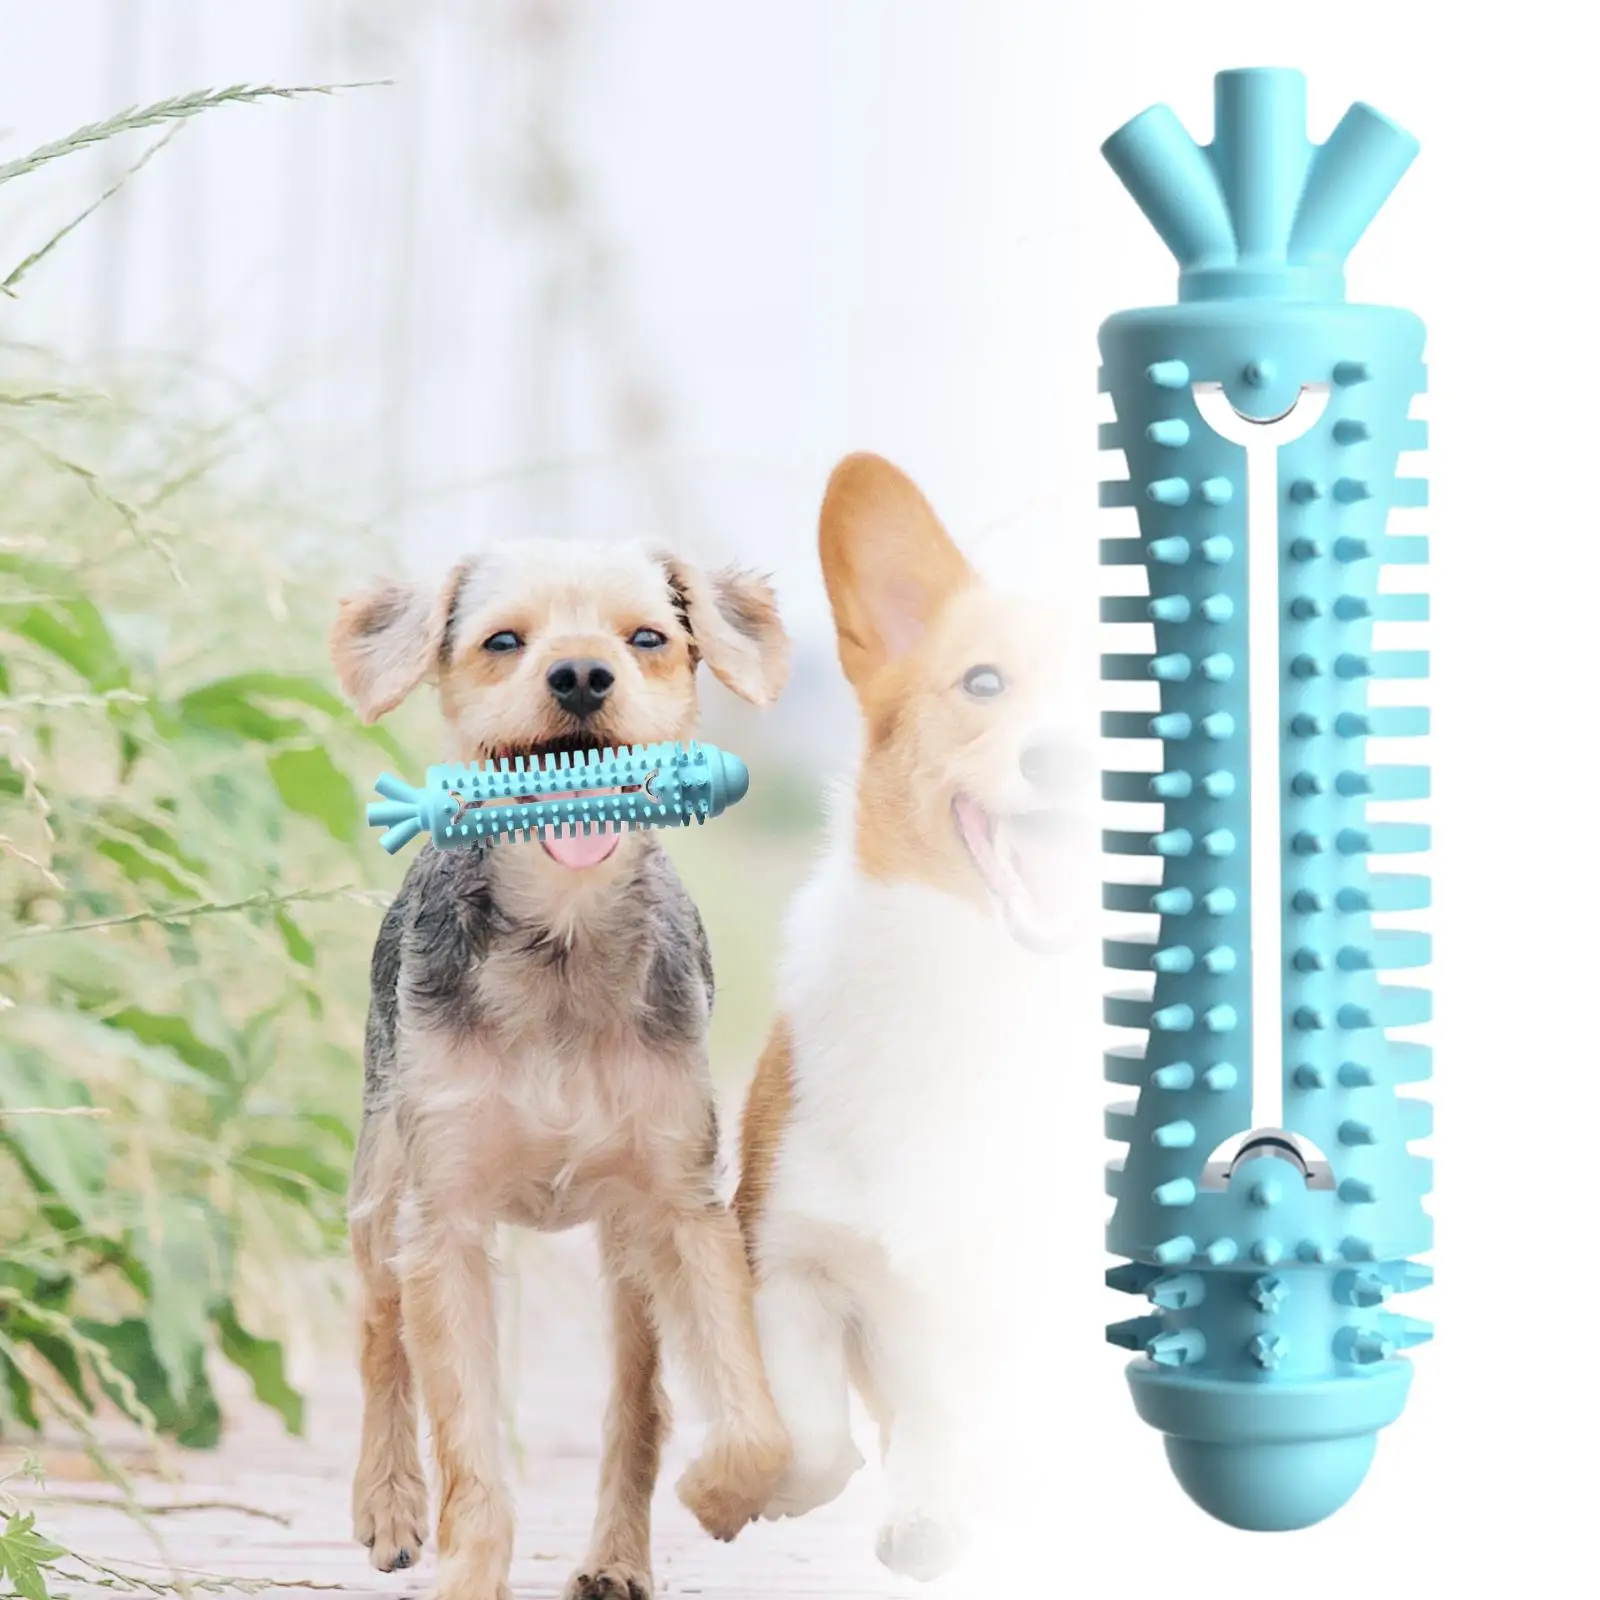 Puppy Teething Toys Educational Toy Increase IQ Bite Resistant Dog Chew Toy